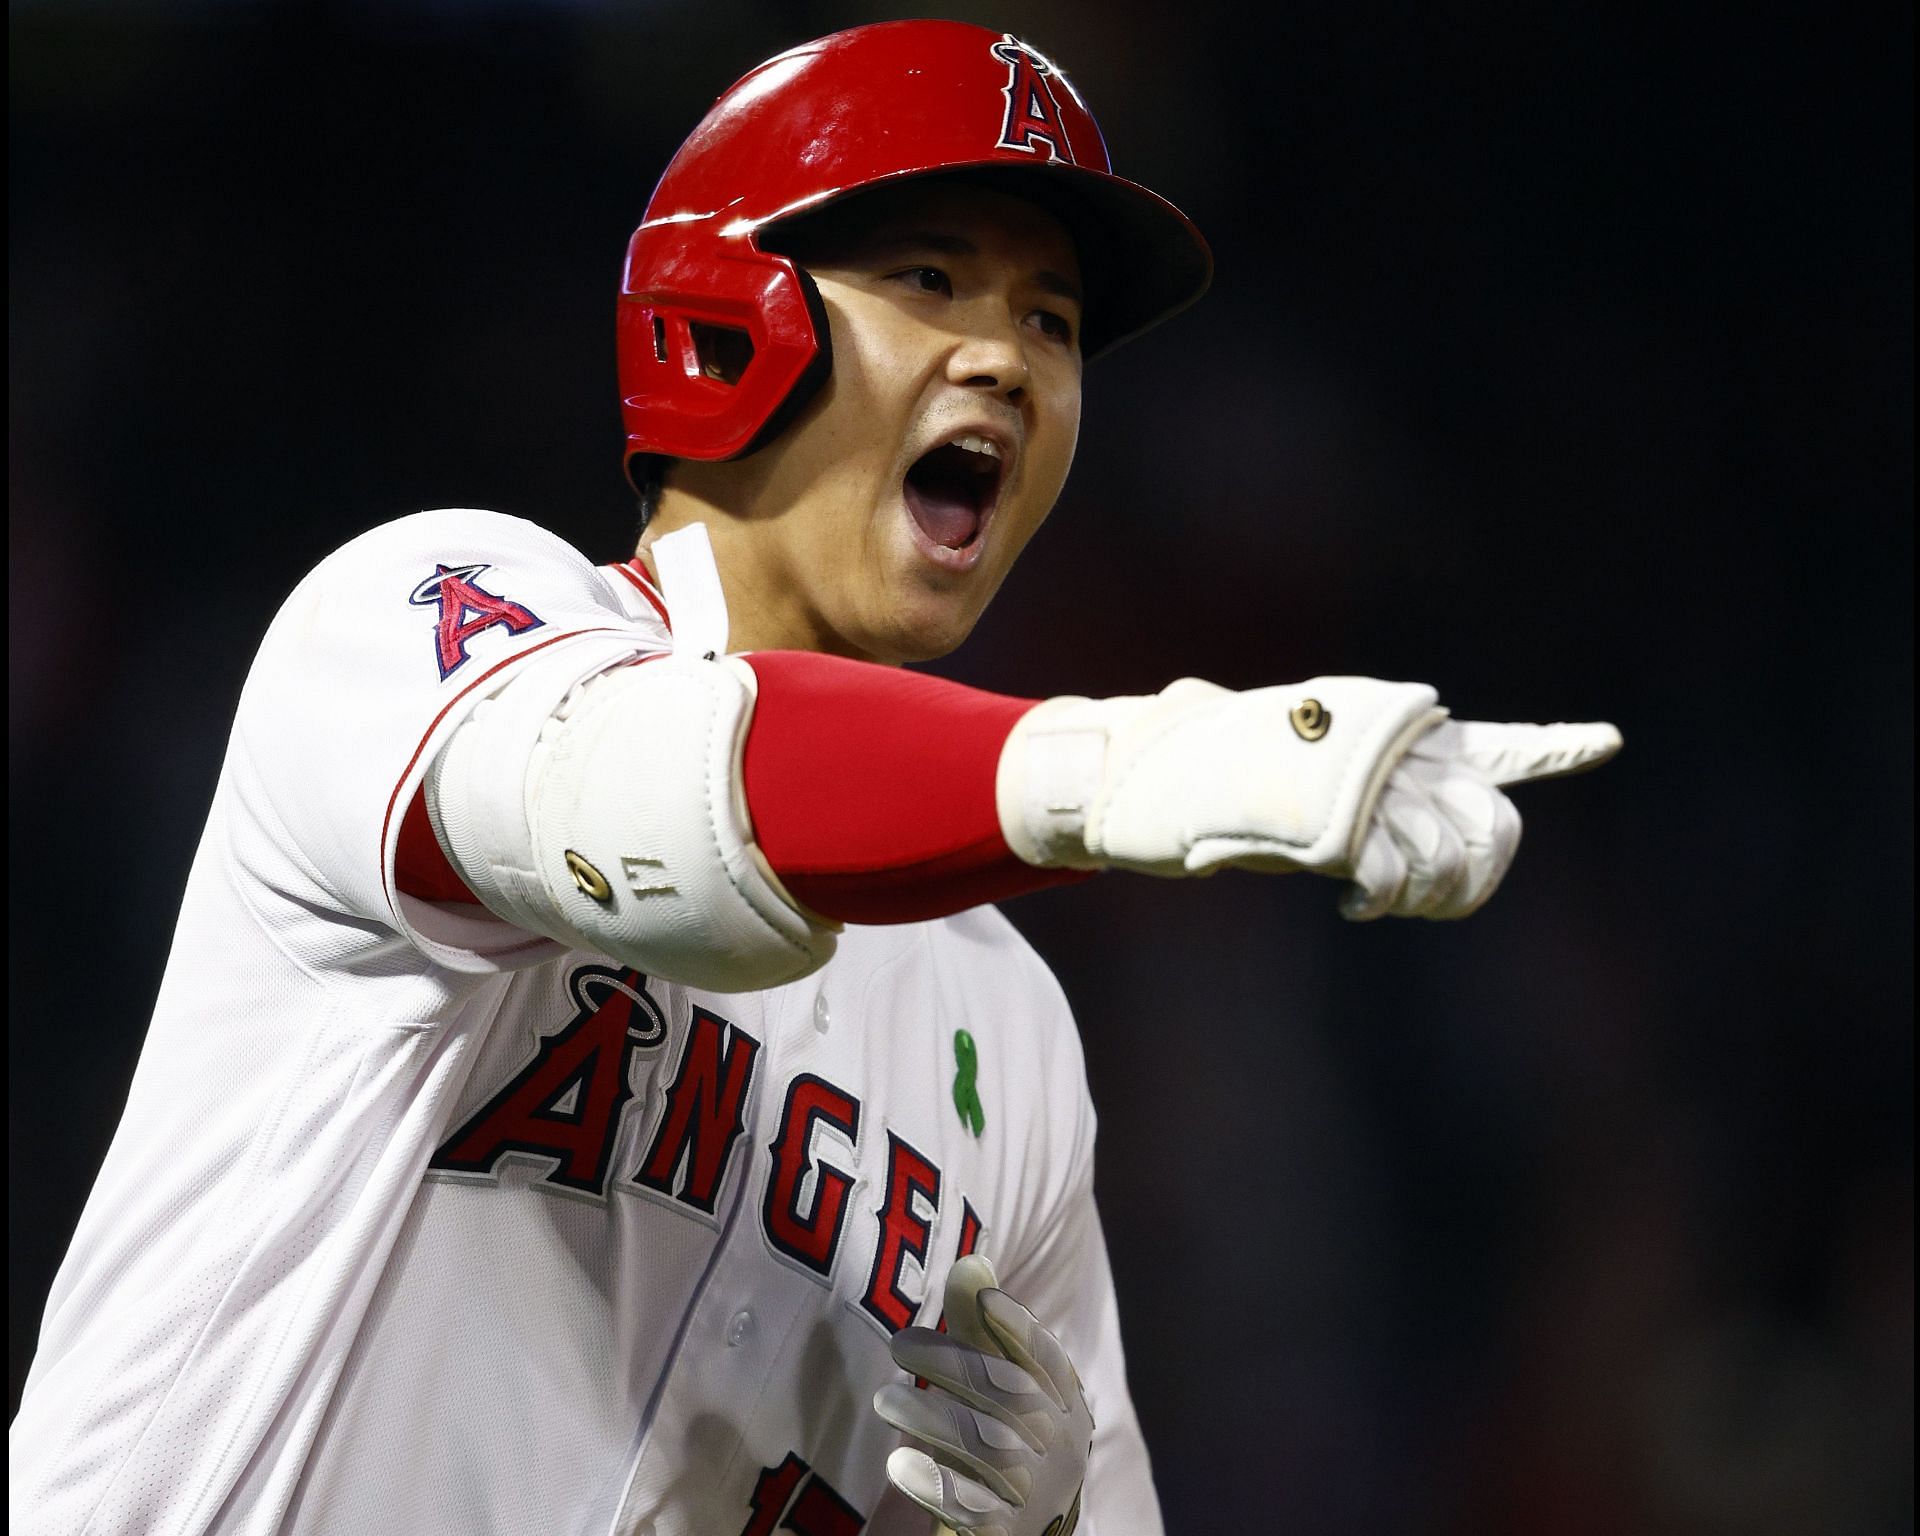 Shohei Ohtani celebrates after hitting a grand slam against the Tampa Bay Rays.